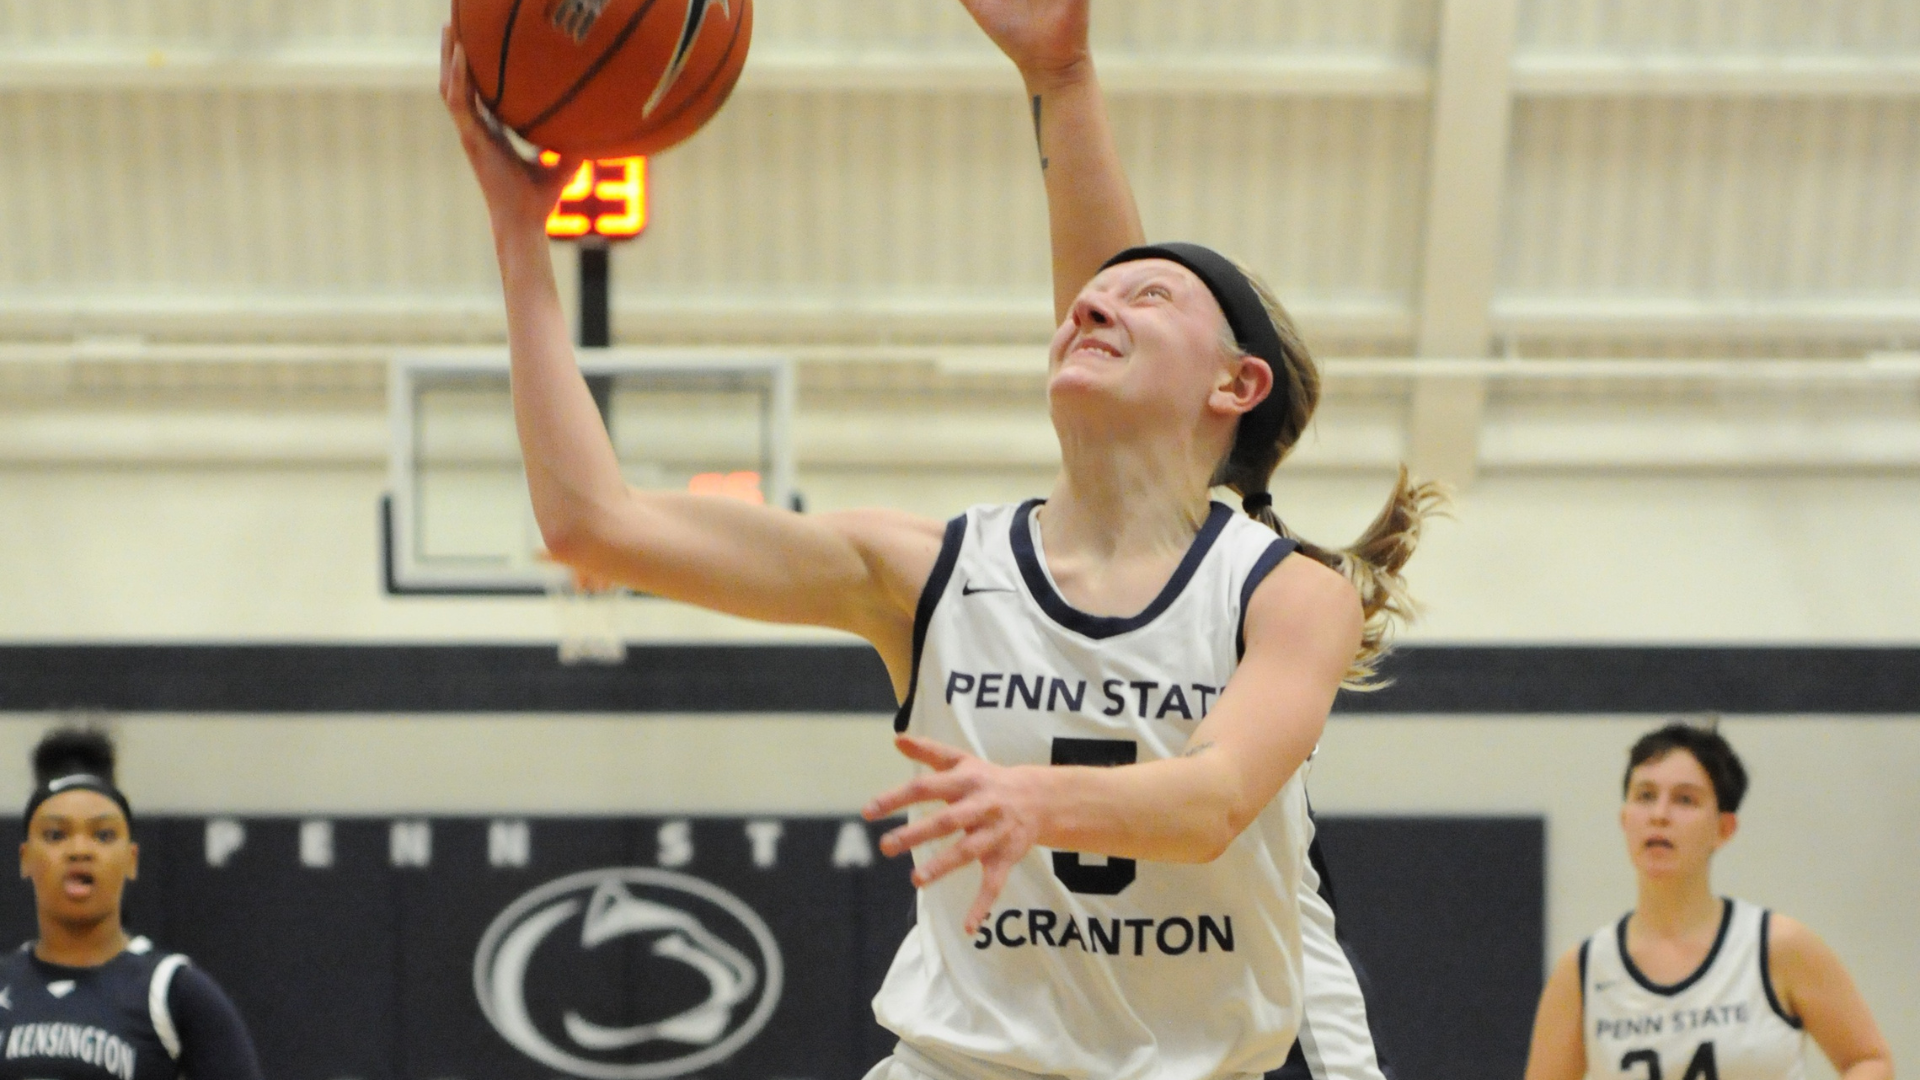 Megan Gatto secured a double-double 23 points and 11 rebounds at PSU Mont Alto on Wednesday night.